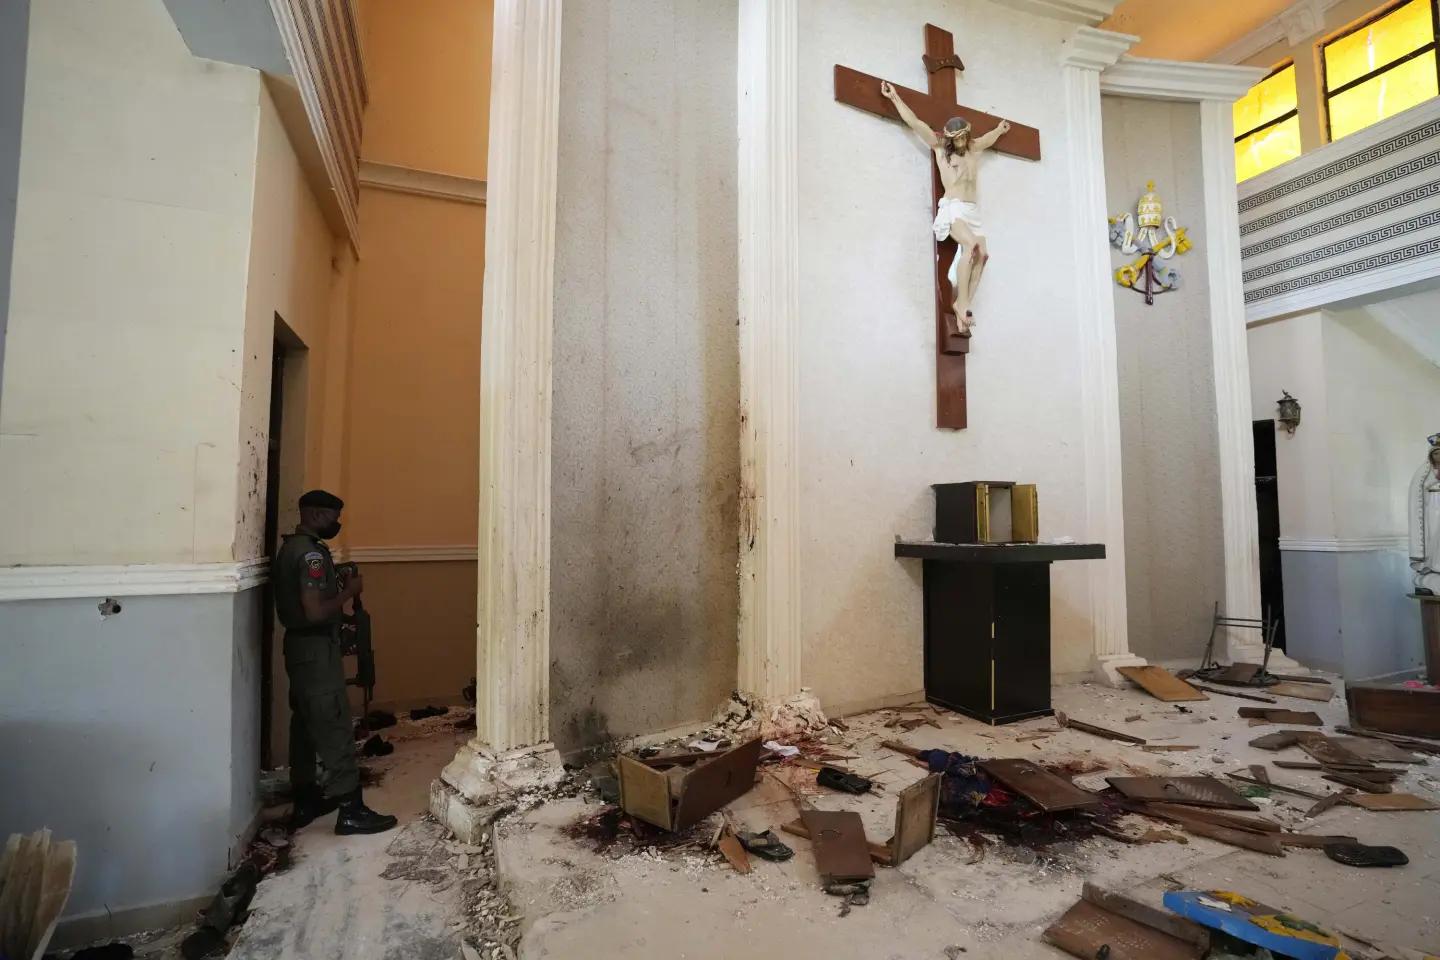 Nigerian Christians sounding alarms over mounting ‘genocide’